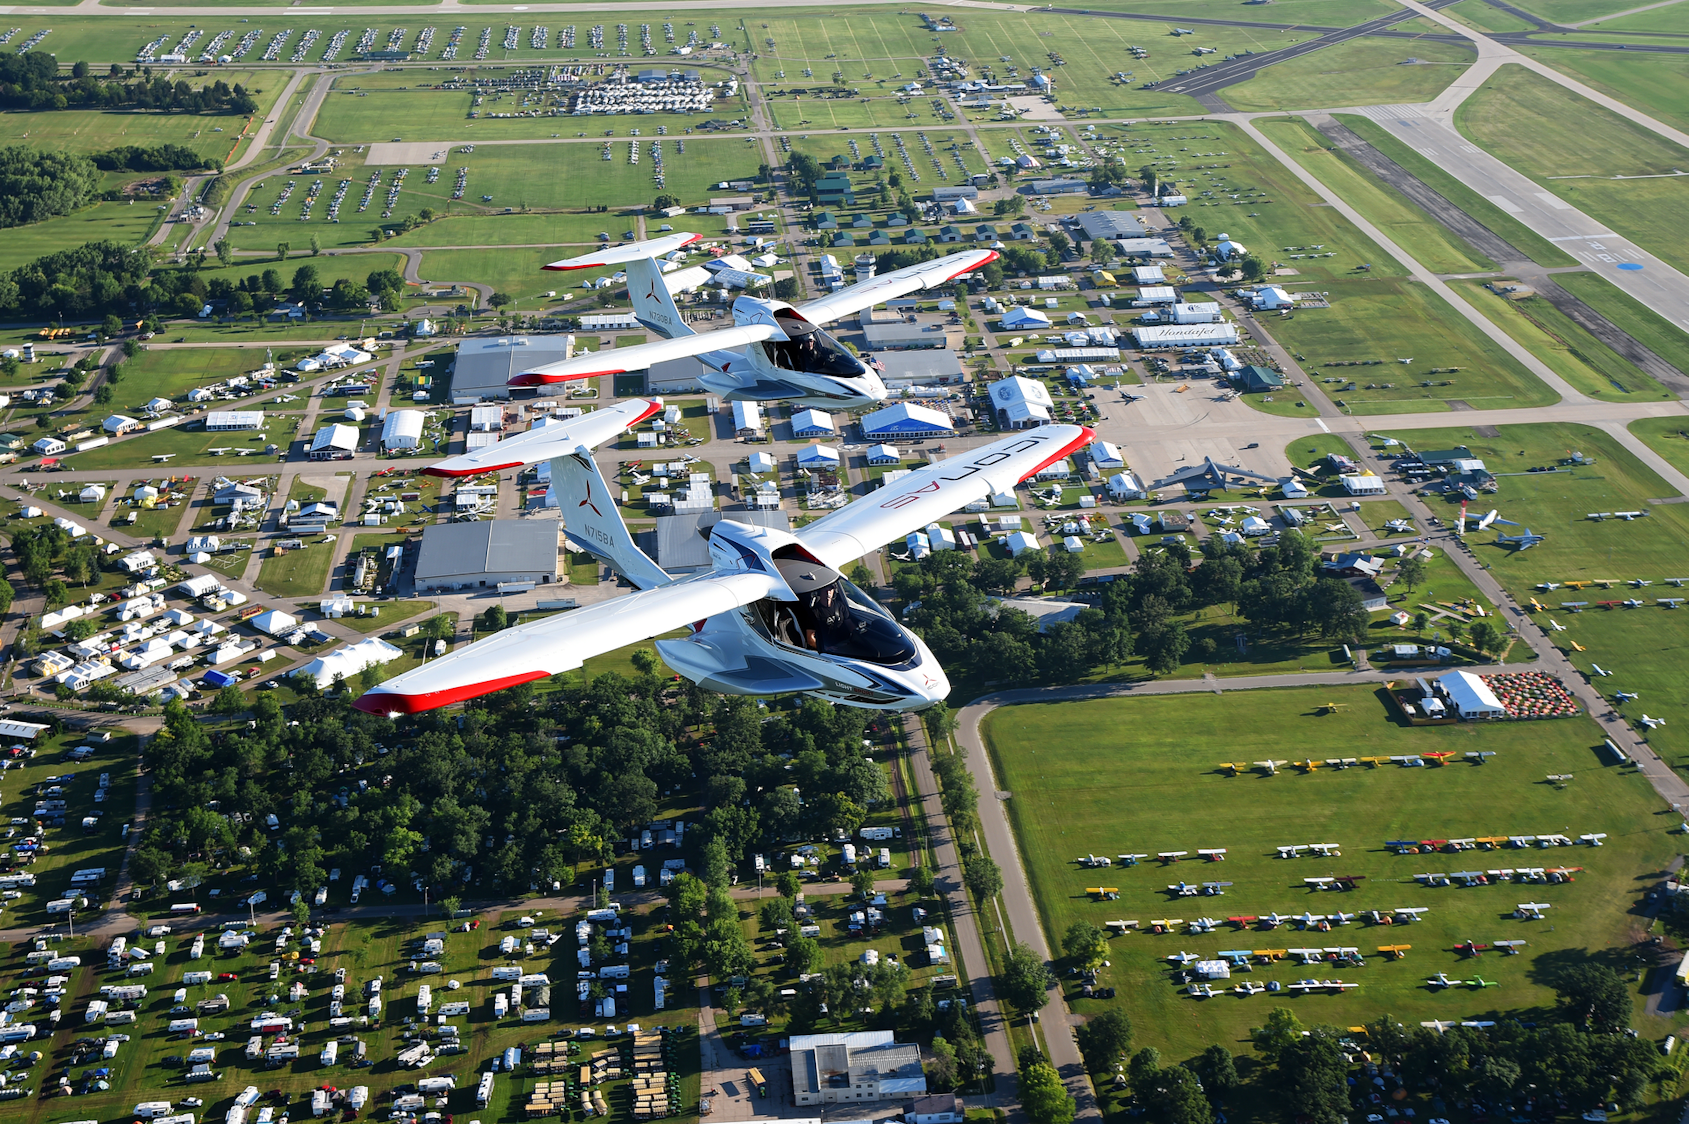 ICON Aircraft Auction Brings Even More Excitement to EAA’s 2016 Gathering of Eagles on July 28